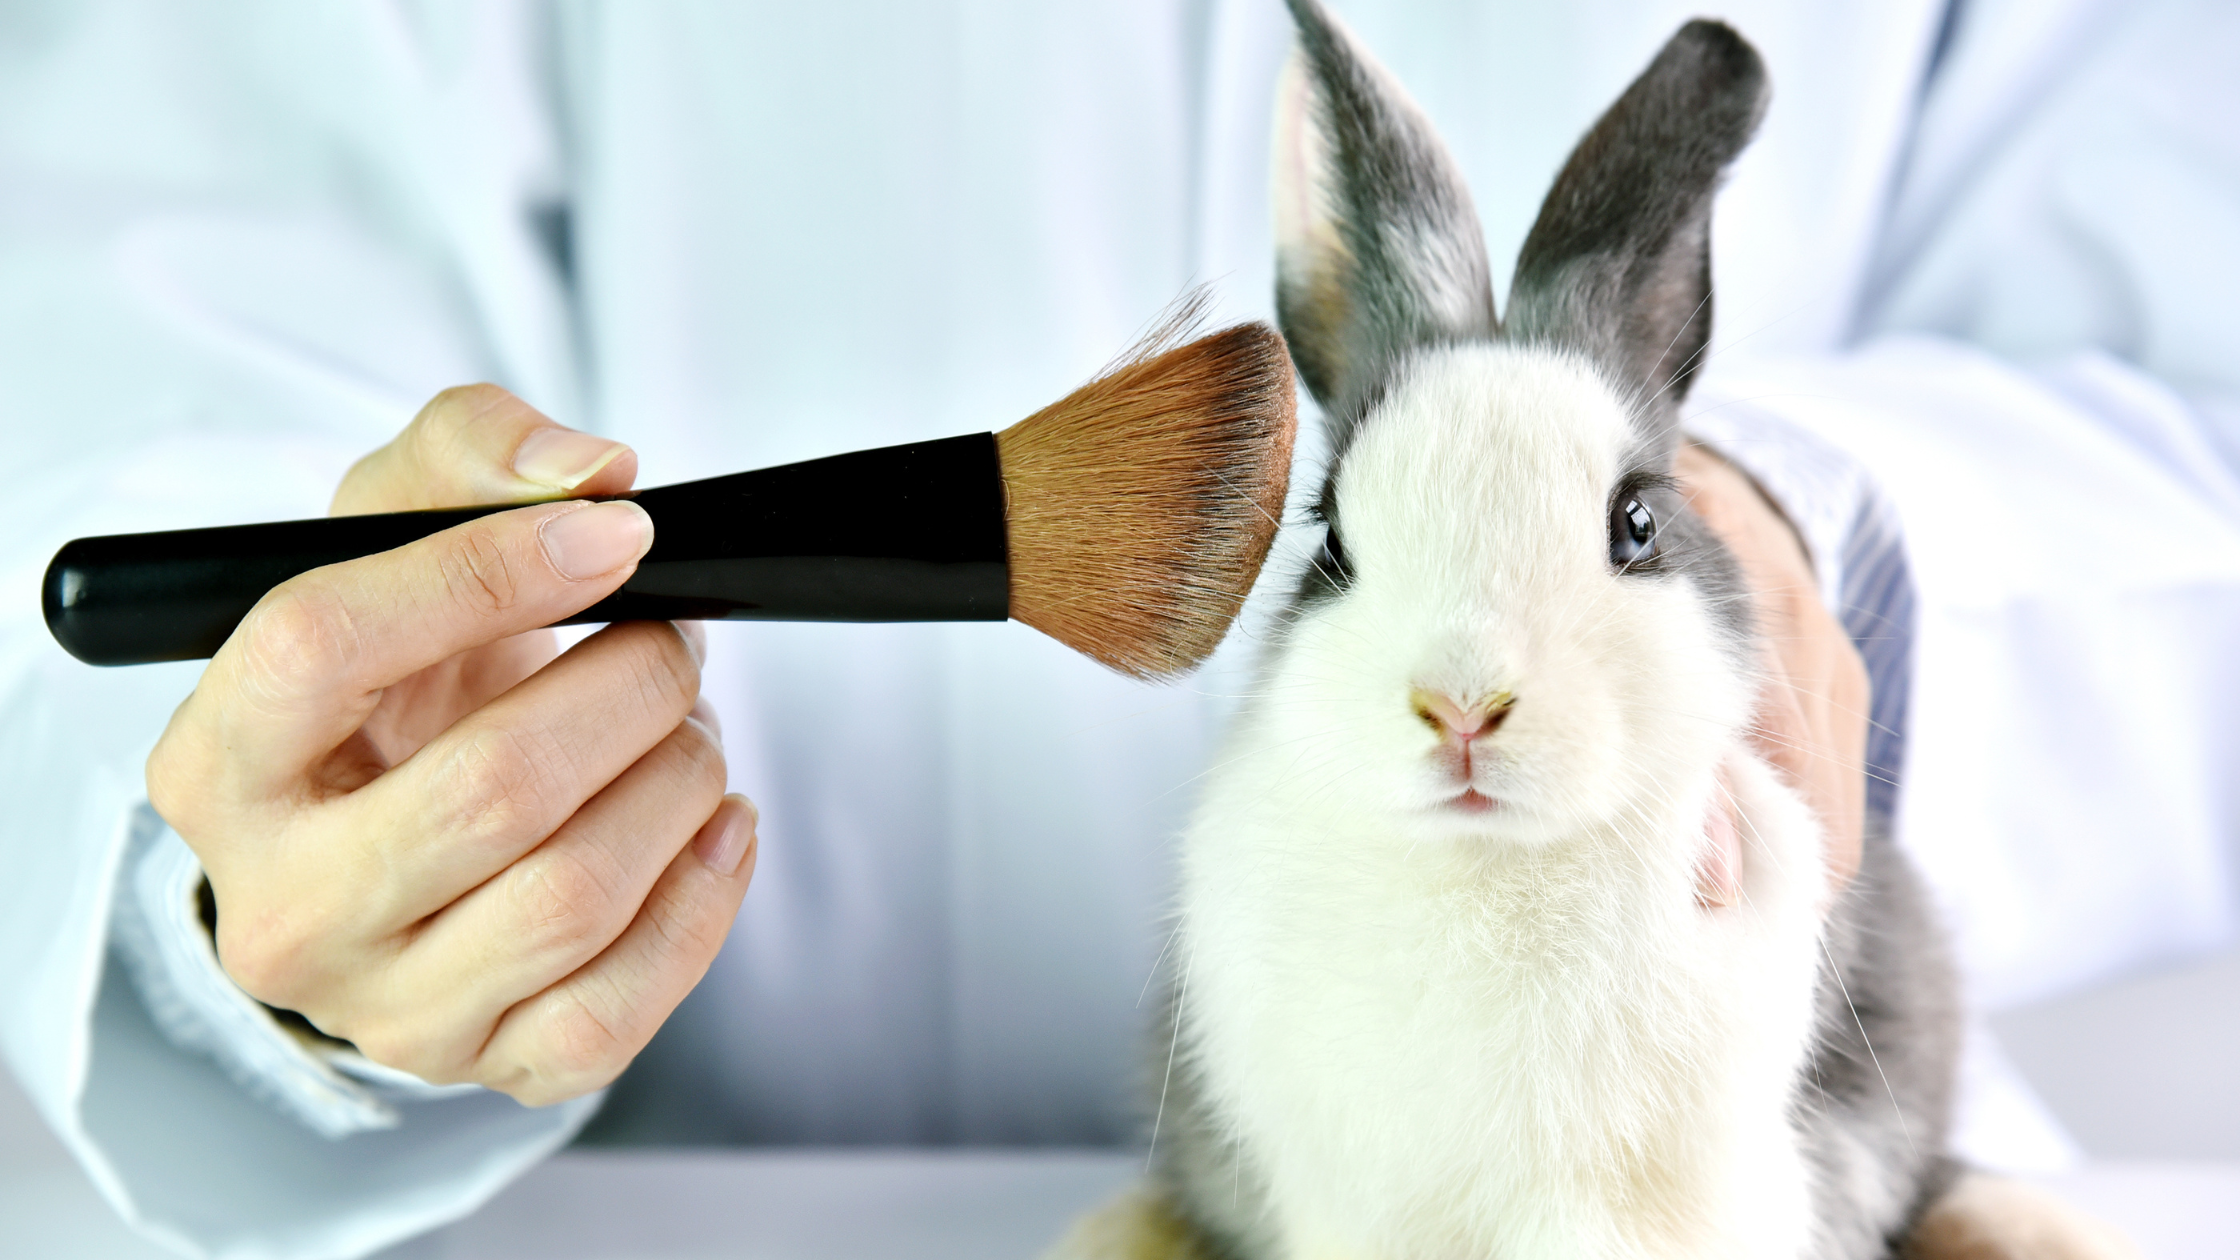 CRUELTY FREE AND WHY IT MATTERS